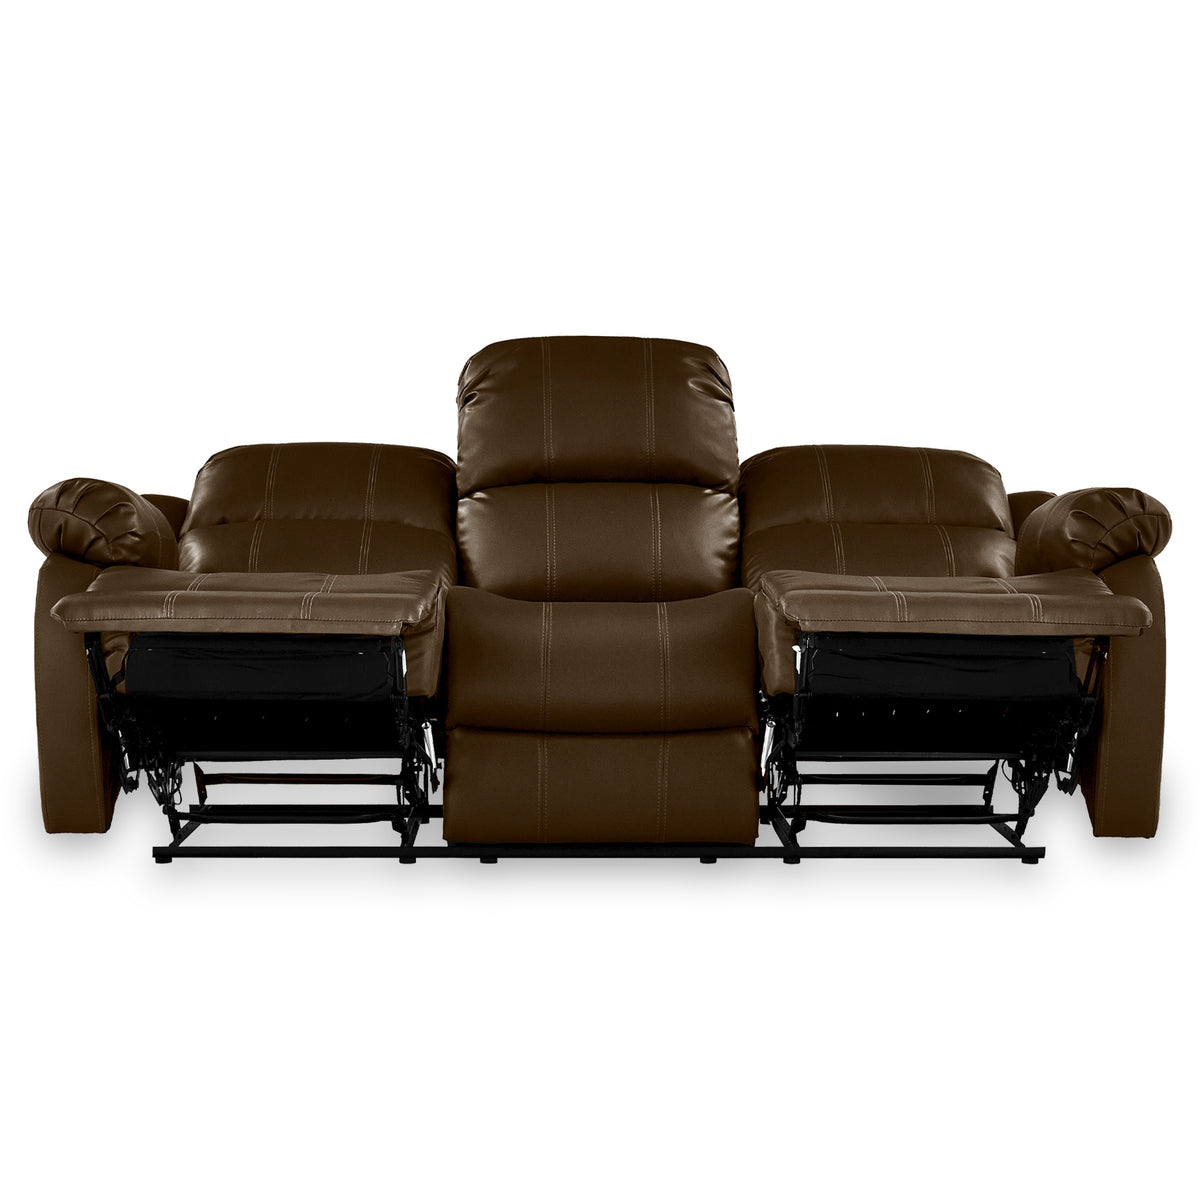 Anton Brown Leather Reclining 3 Seater Sofa